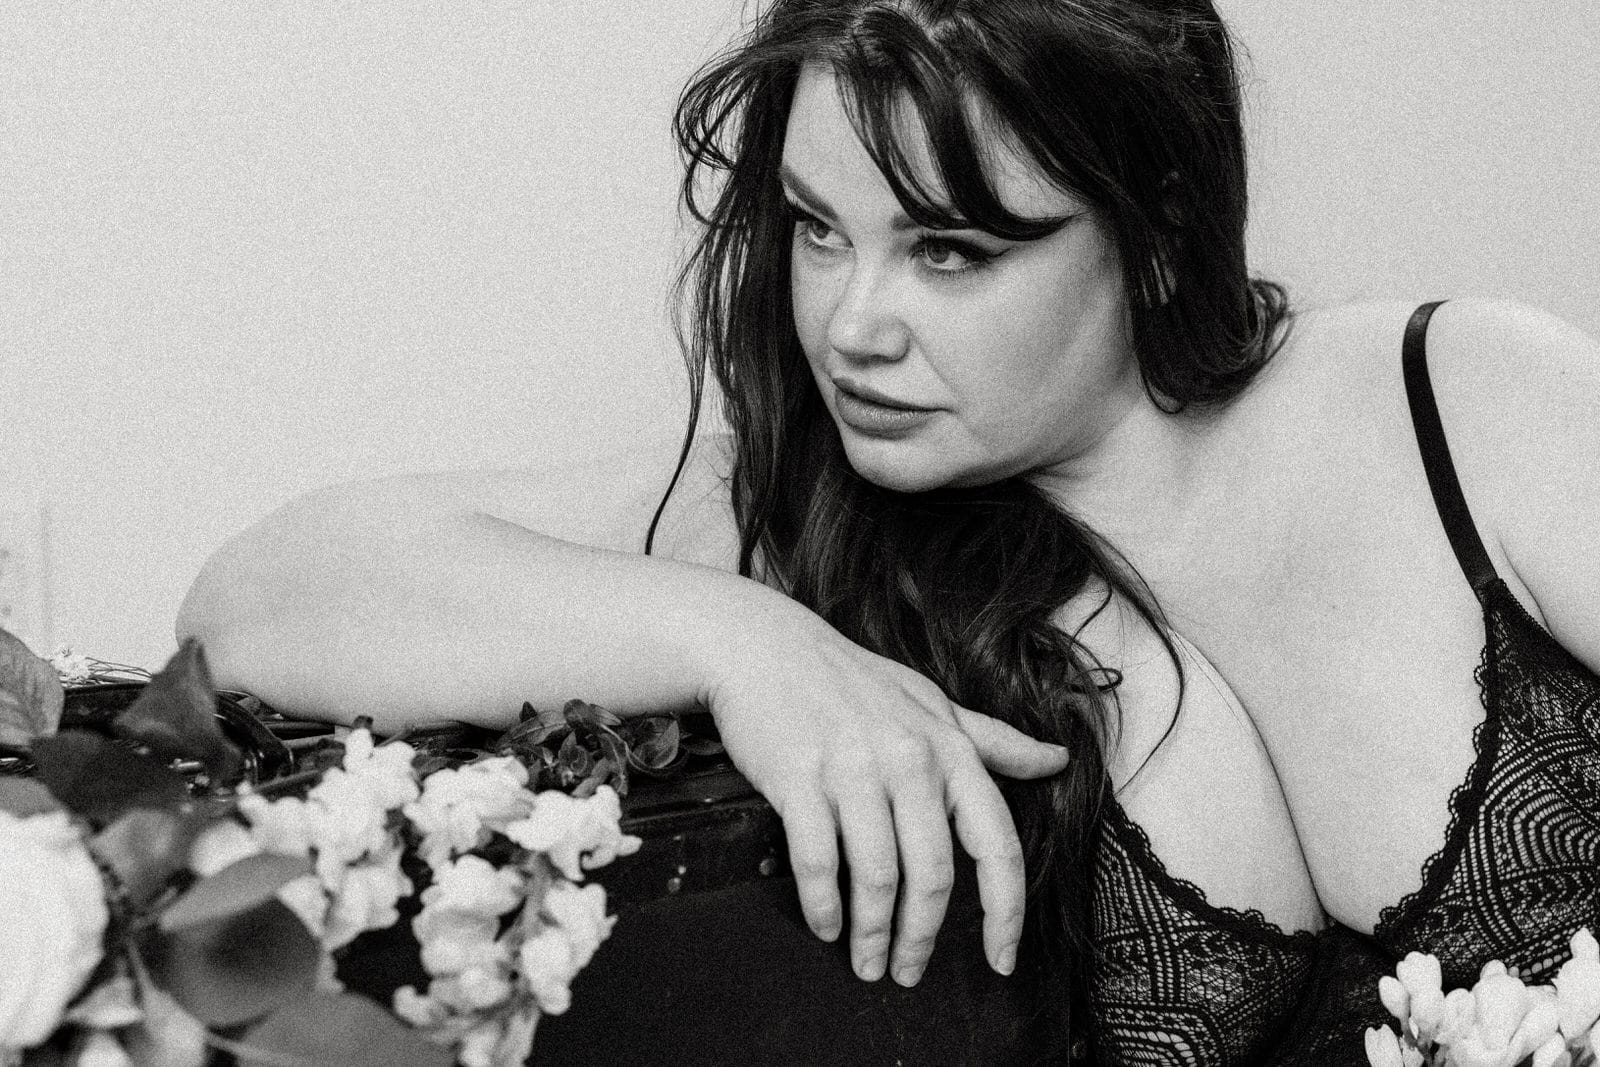 Plus size boudoir photo of a woman leaning and flowers under her arm